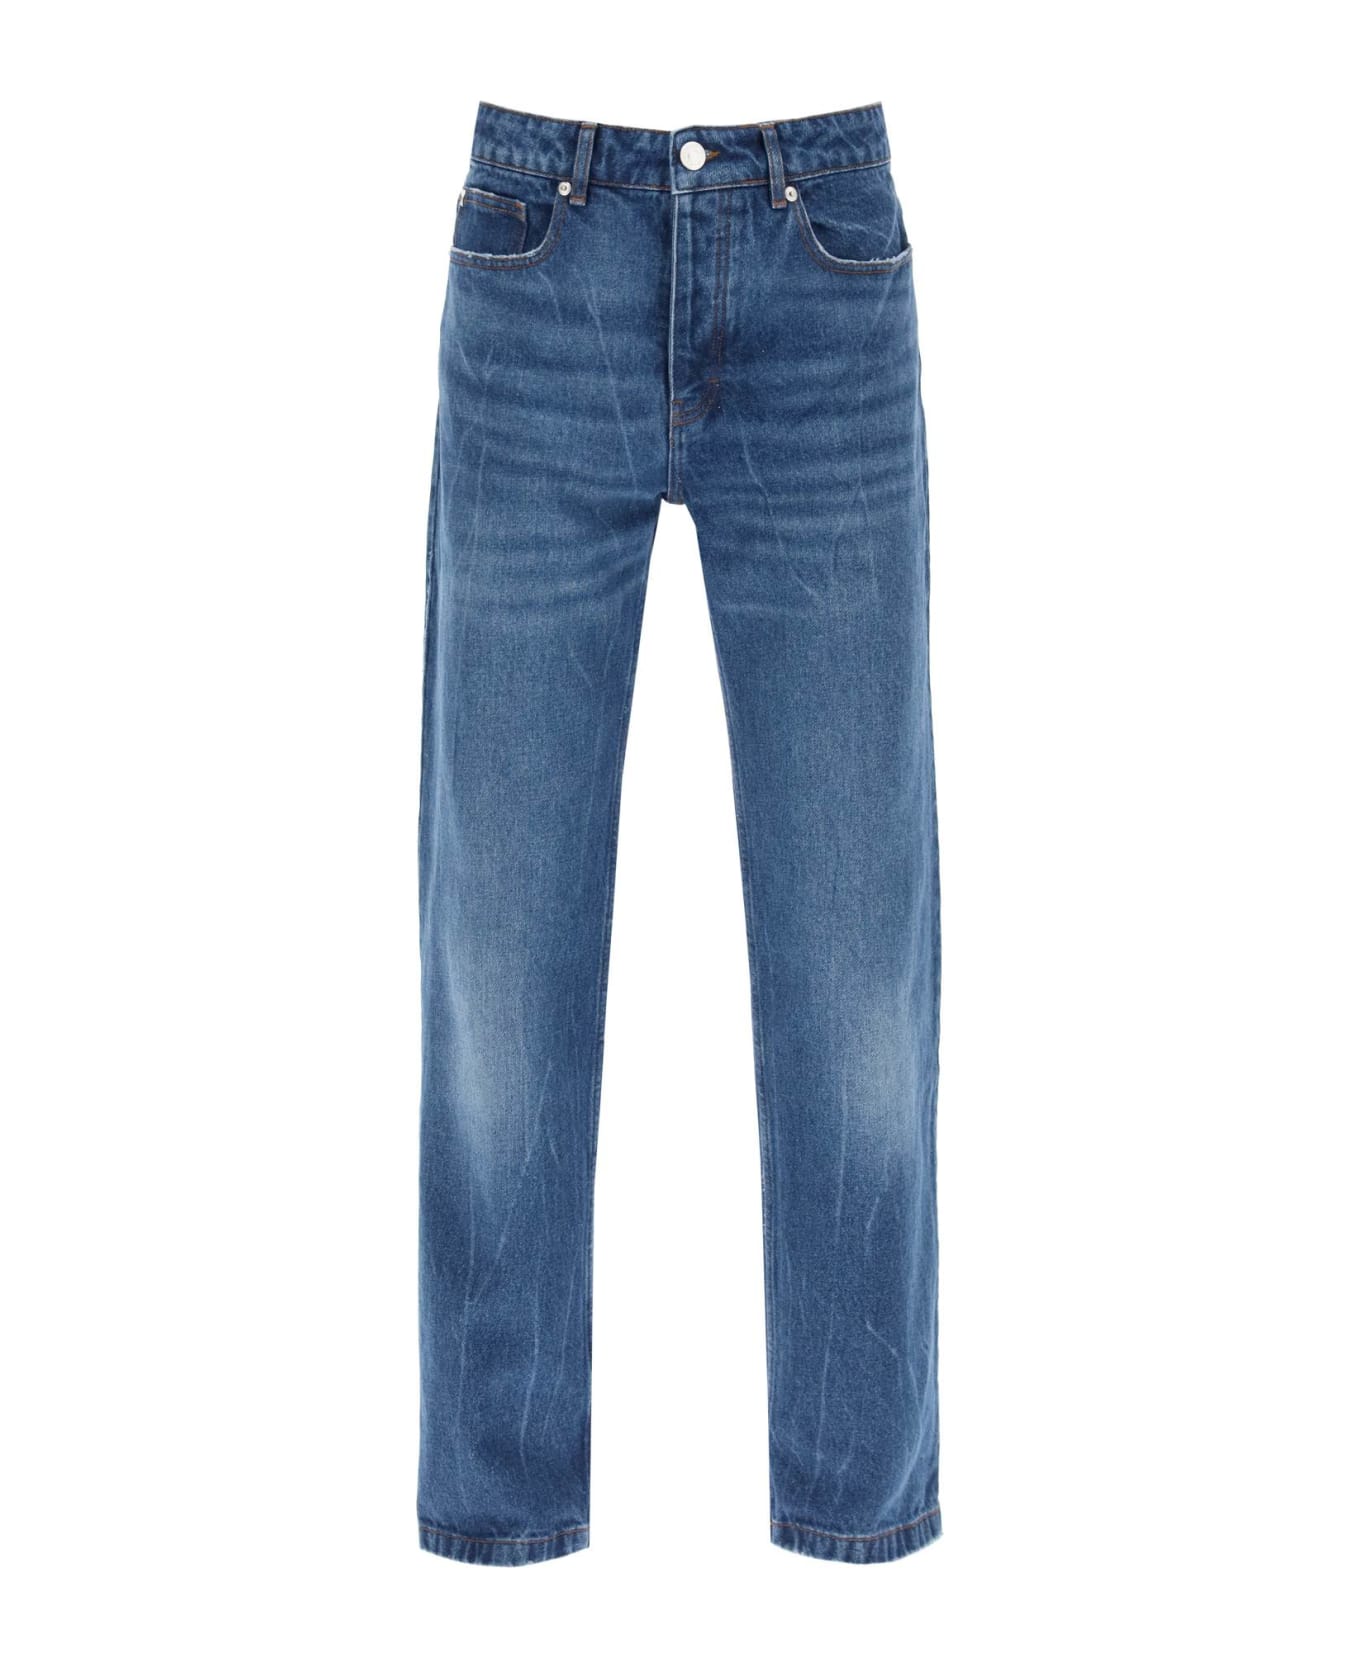 Ami Alexandre Mattiussi Loose Jeans With Straight Cut - Blue デニム